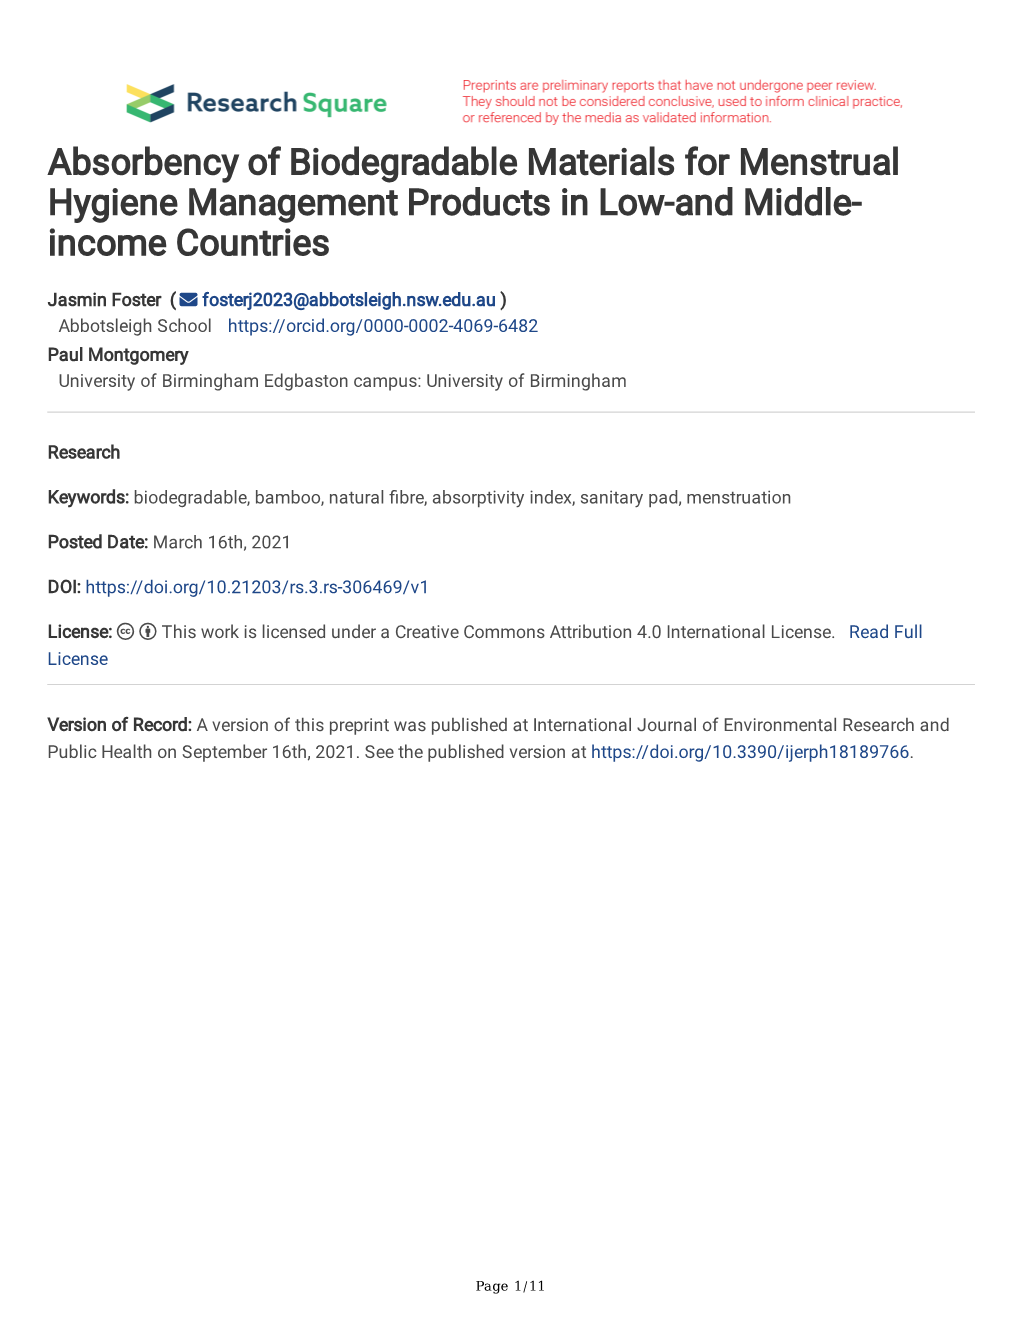 Absorbency of Biodegradable Materials for Menstrual Hygiene Management Products in Low-And Middle- Income Countries